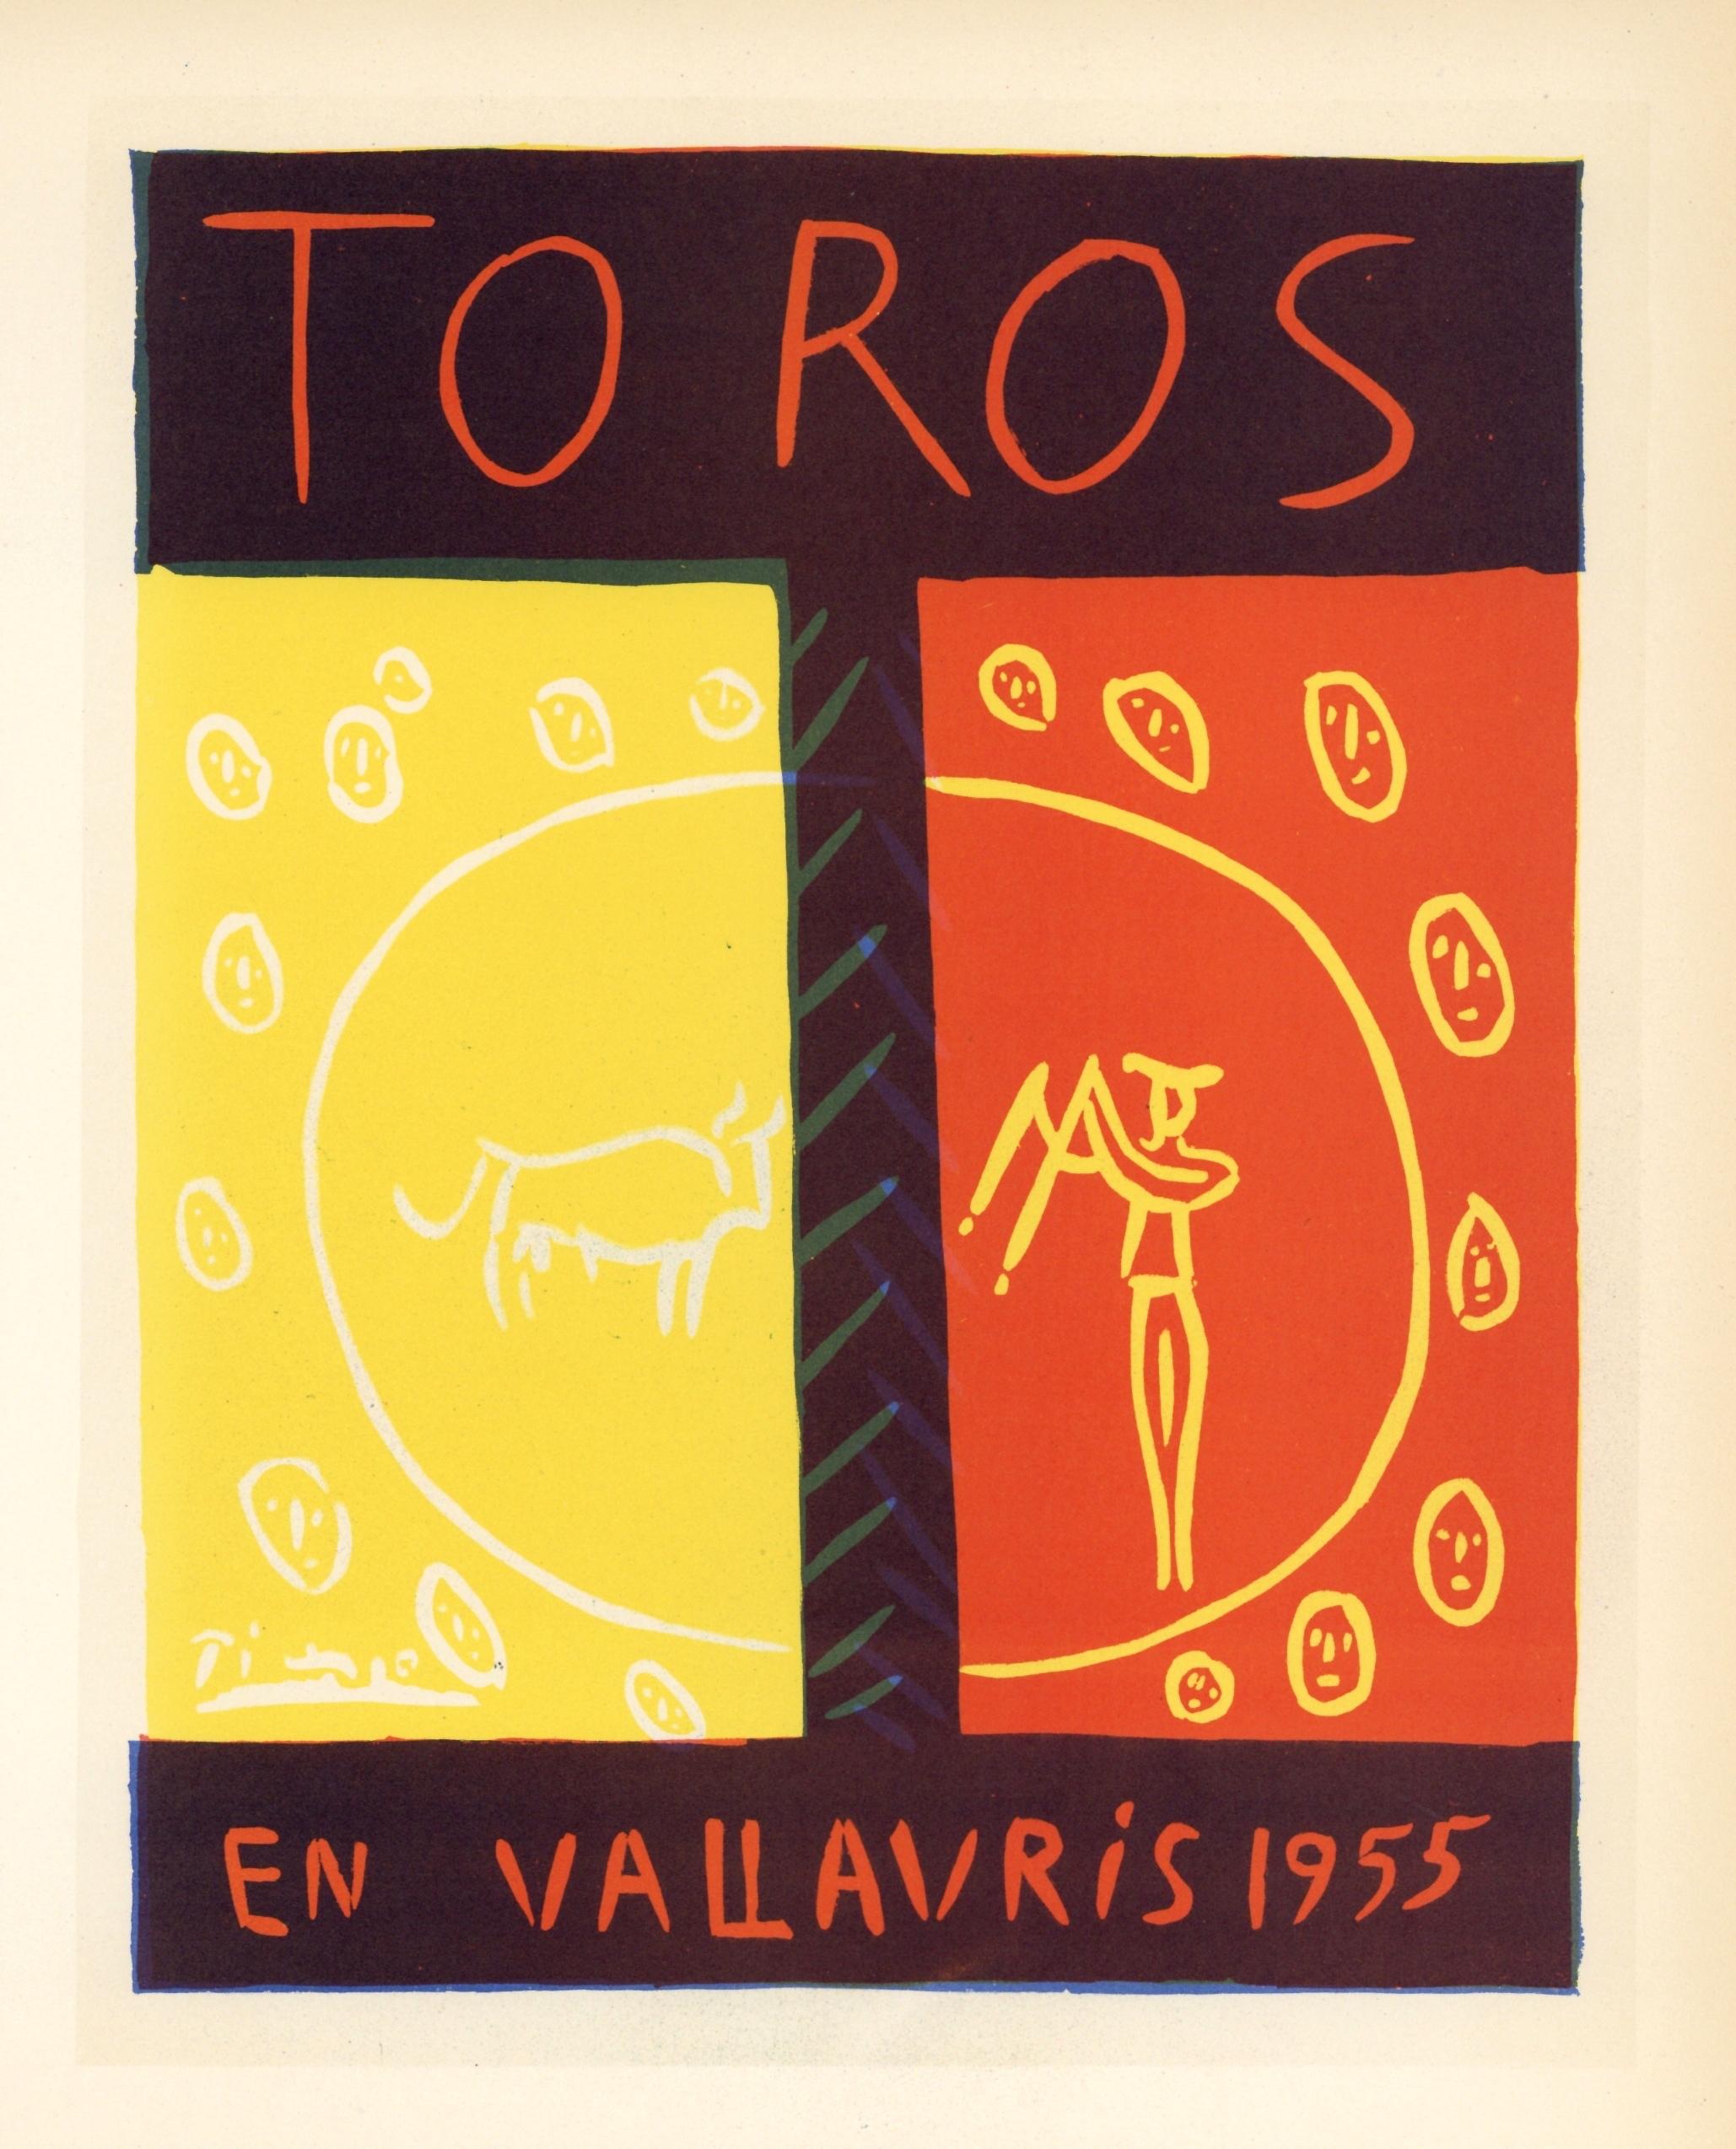 "Toros Vallauris" lithograph poster - Print by (after) Pablo Picasso